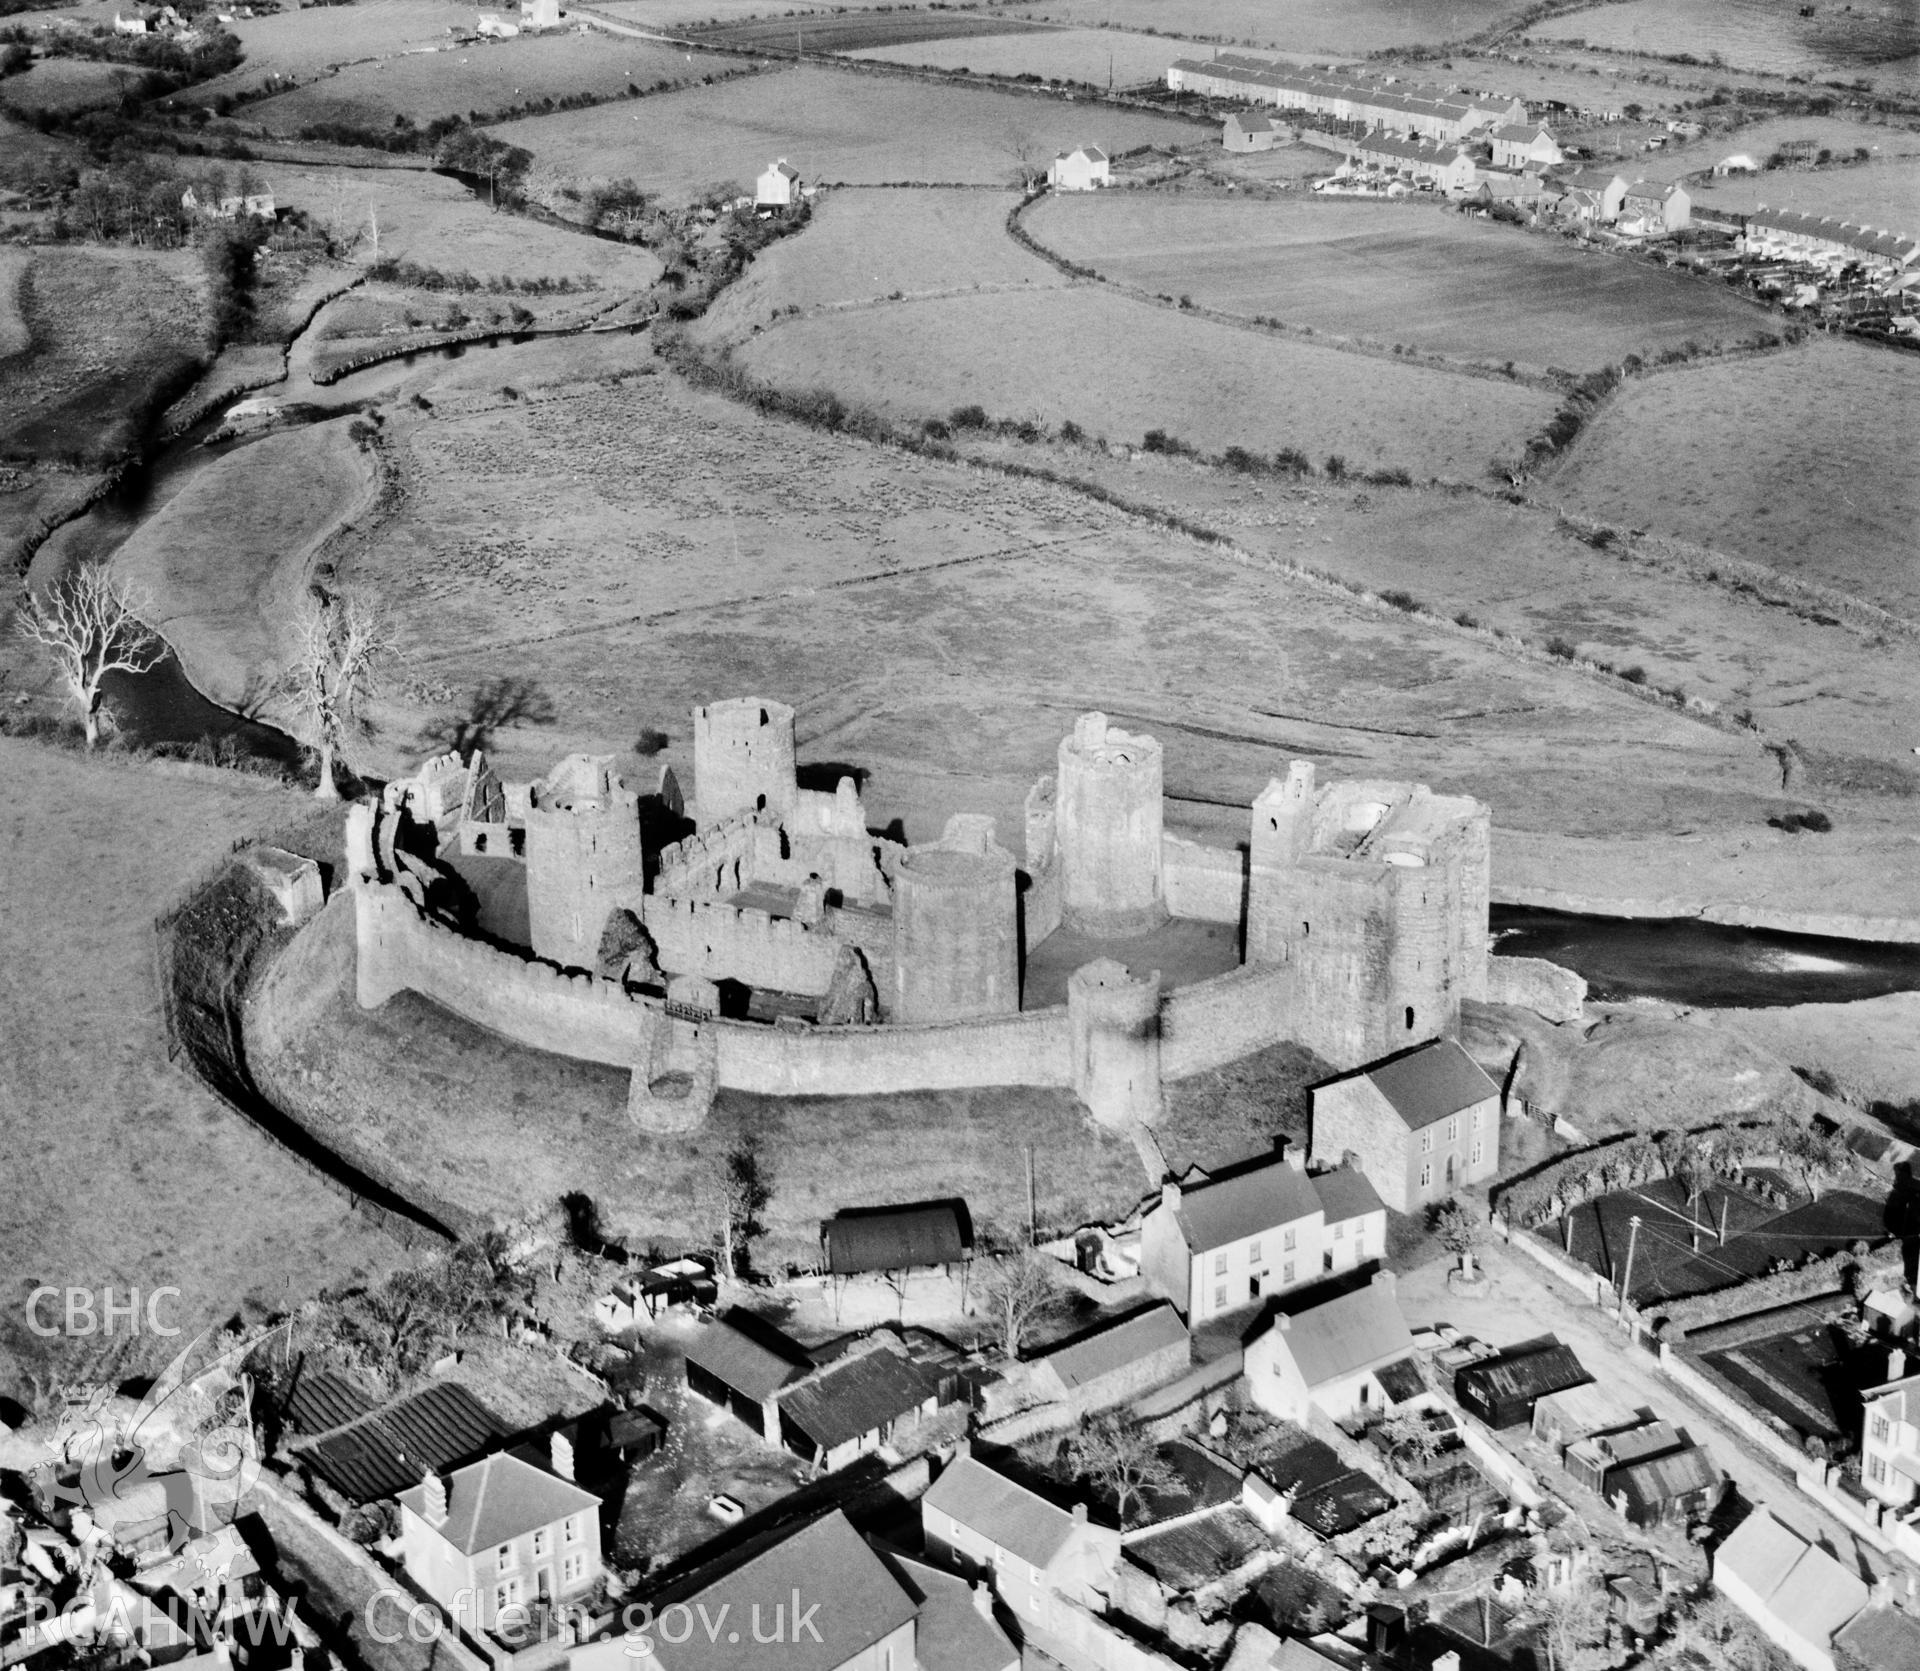 View of Kidwelly showing castle